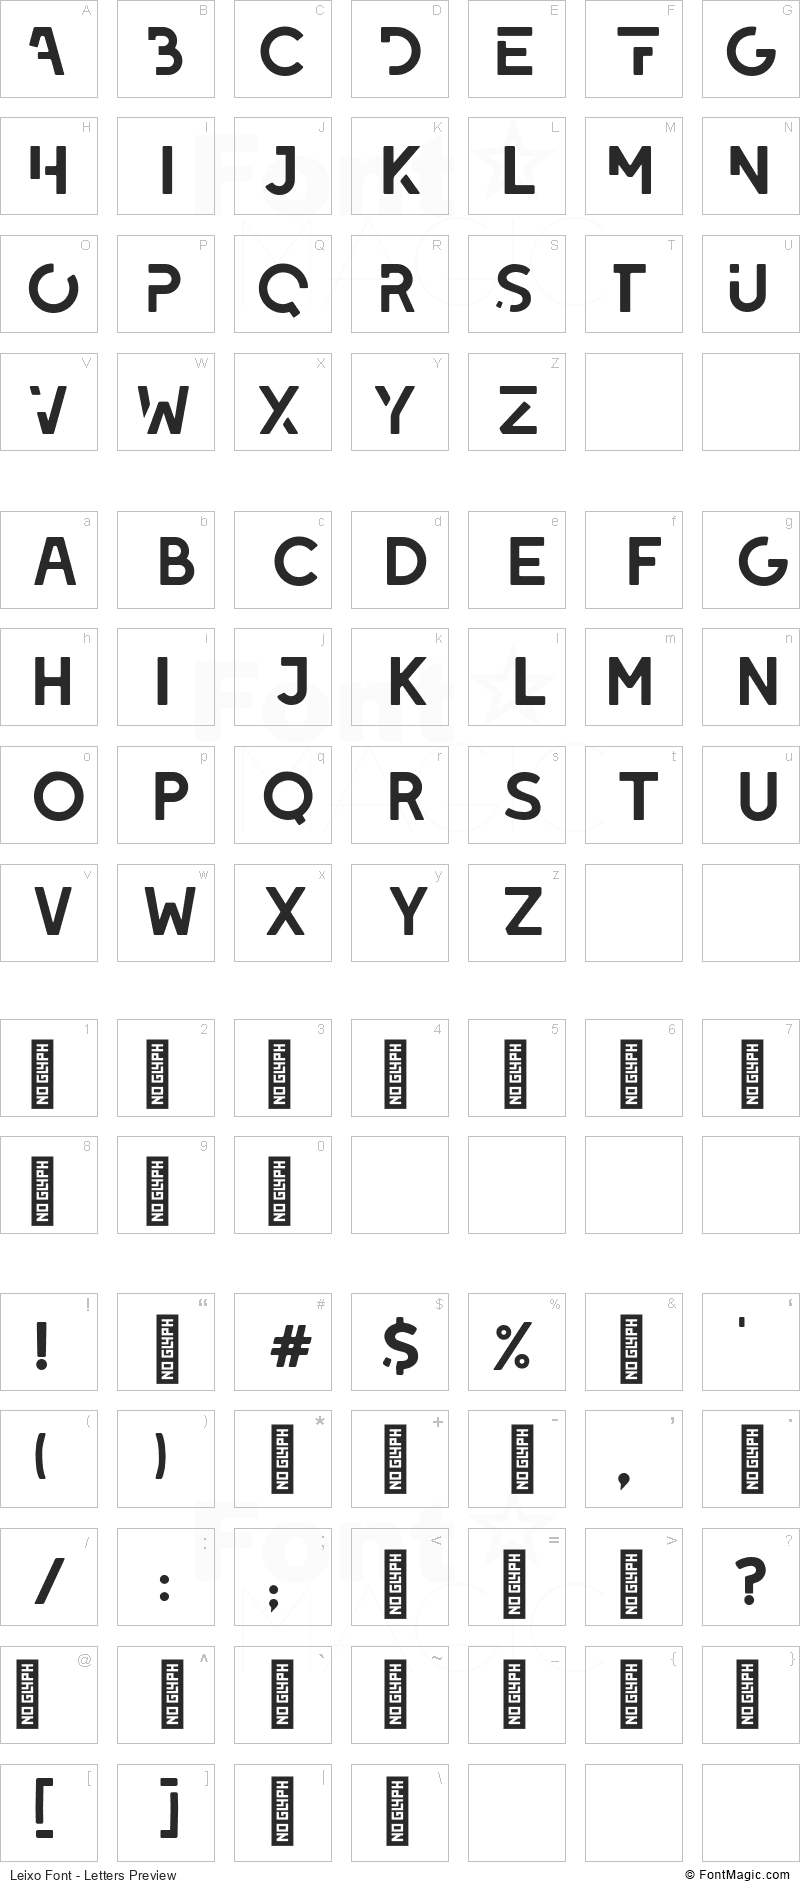 Leixo Font - All Latters Preview Chart